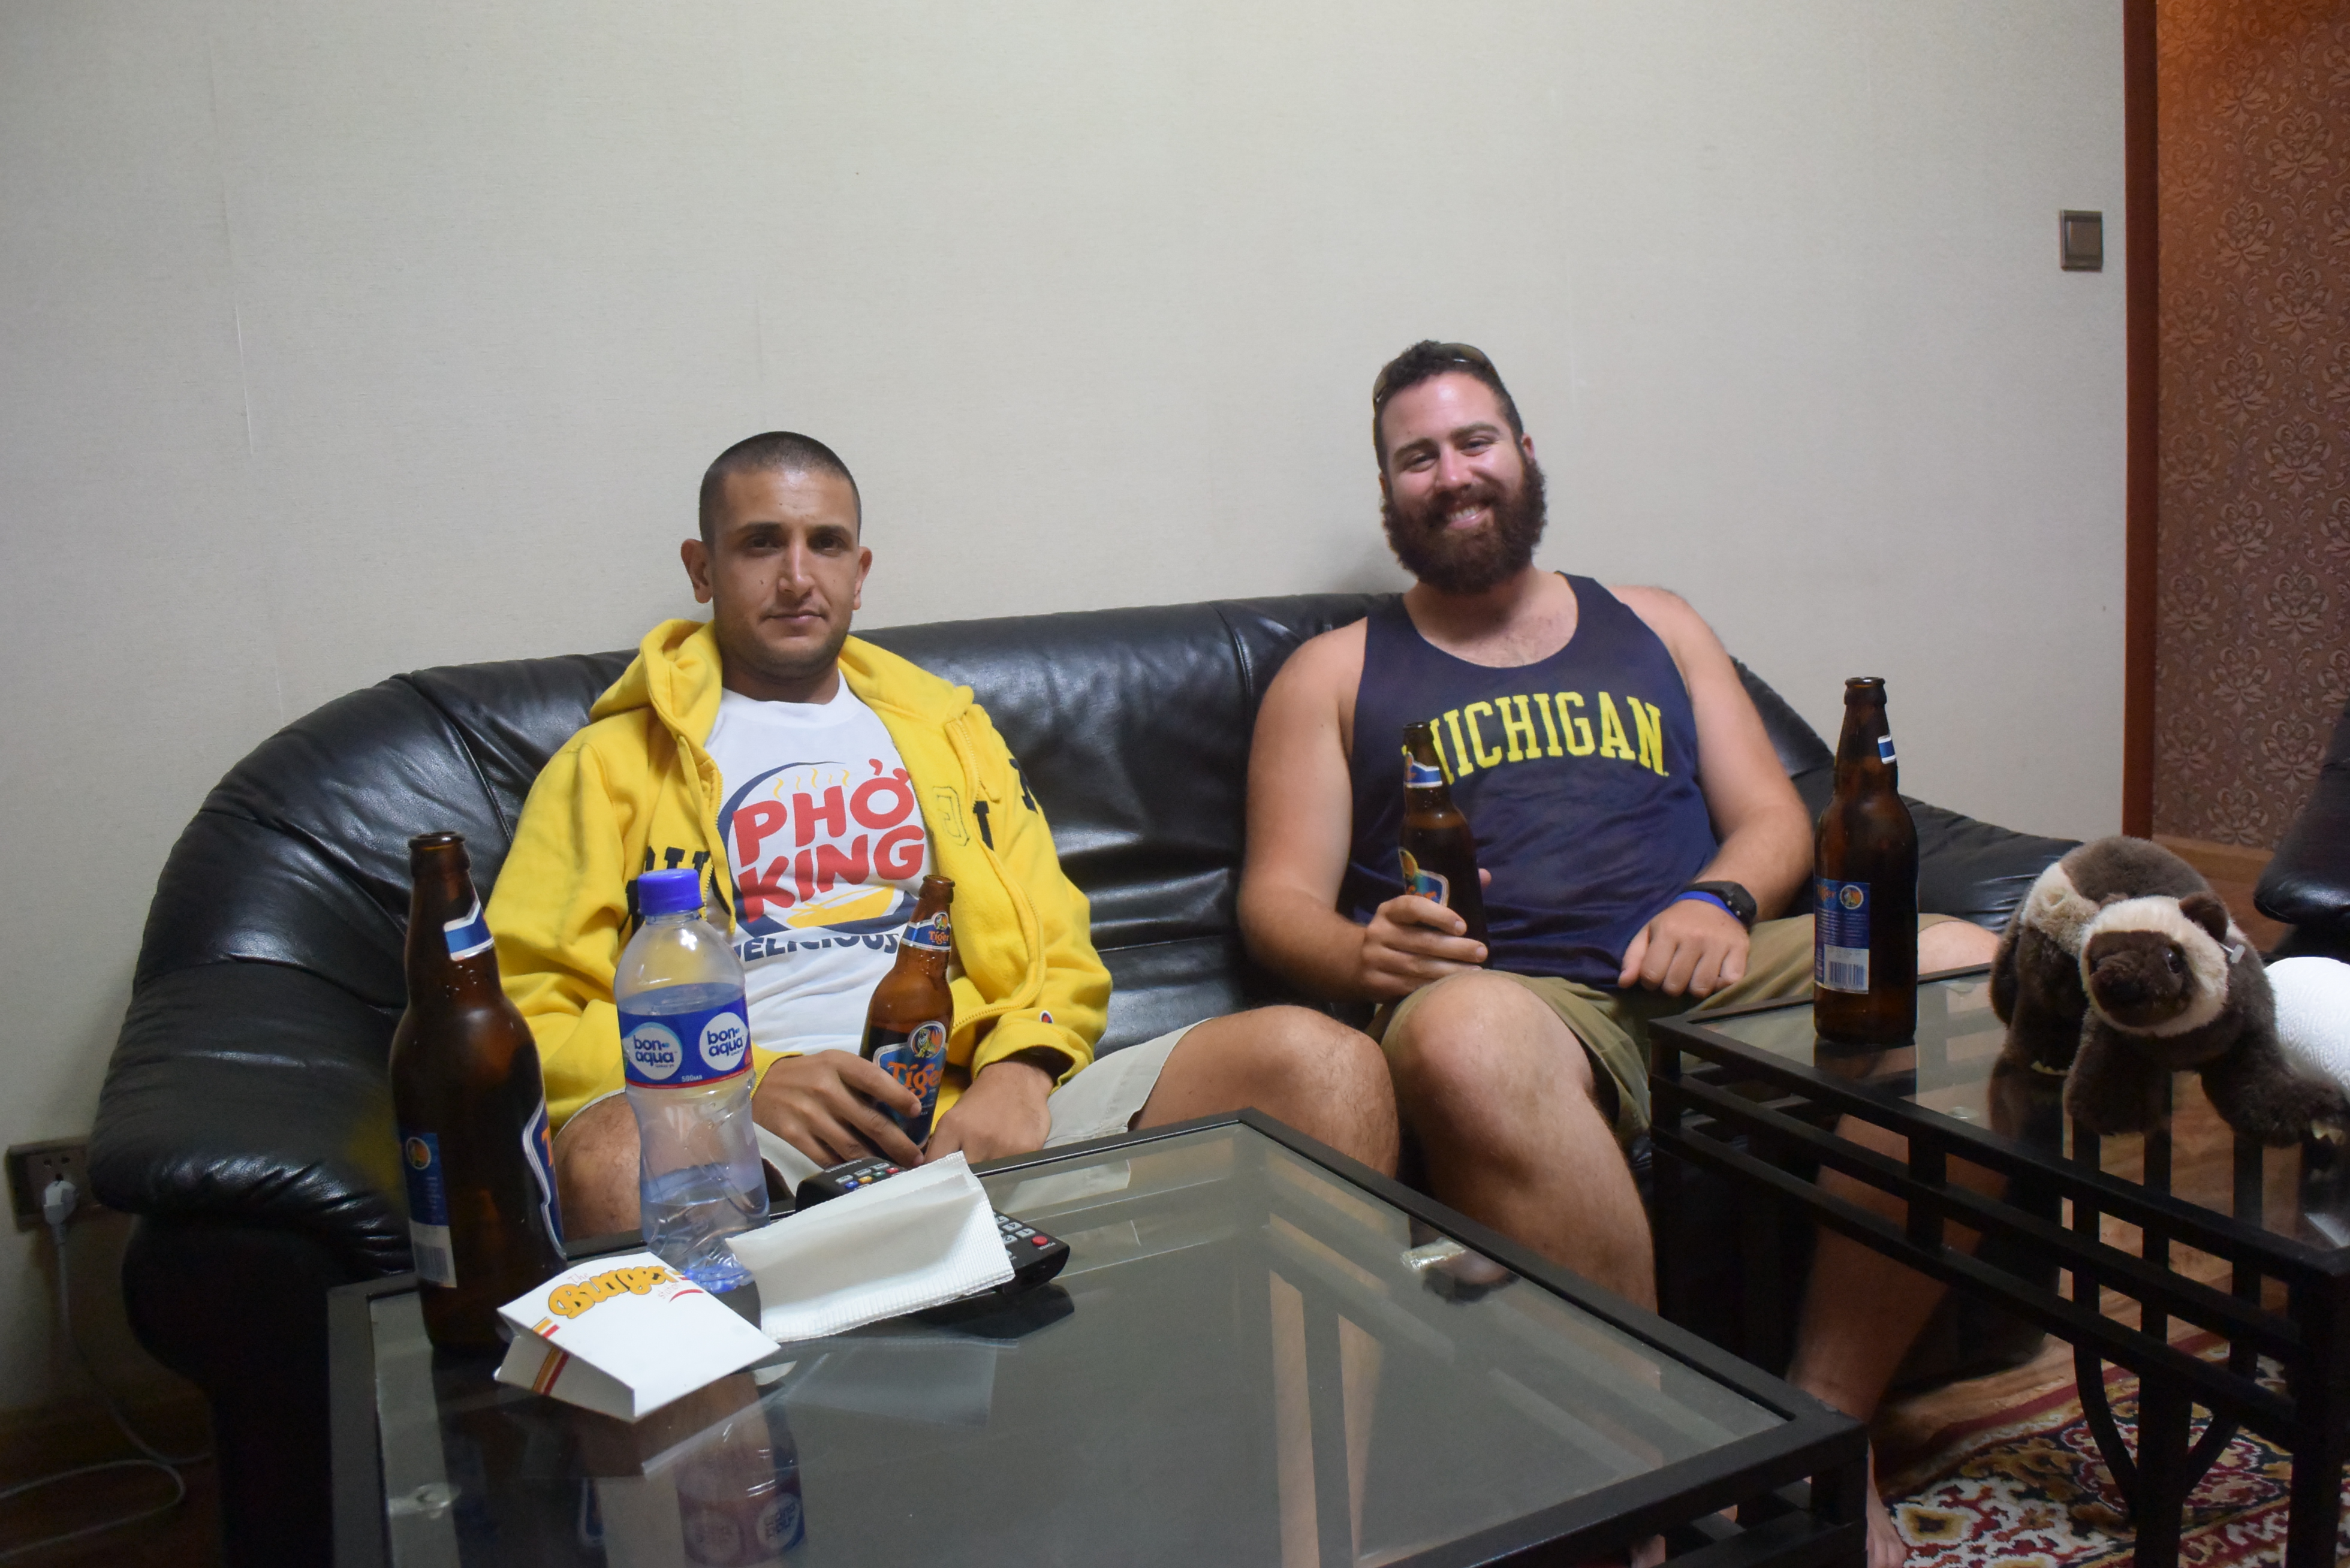 two men sitting on a couch with beer bottles and a glass table